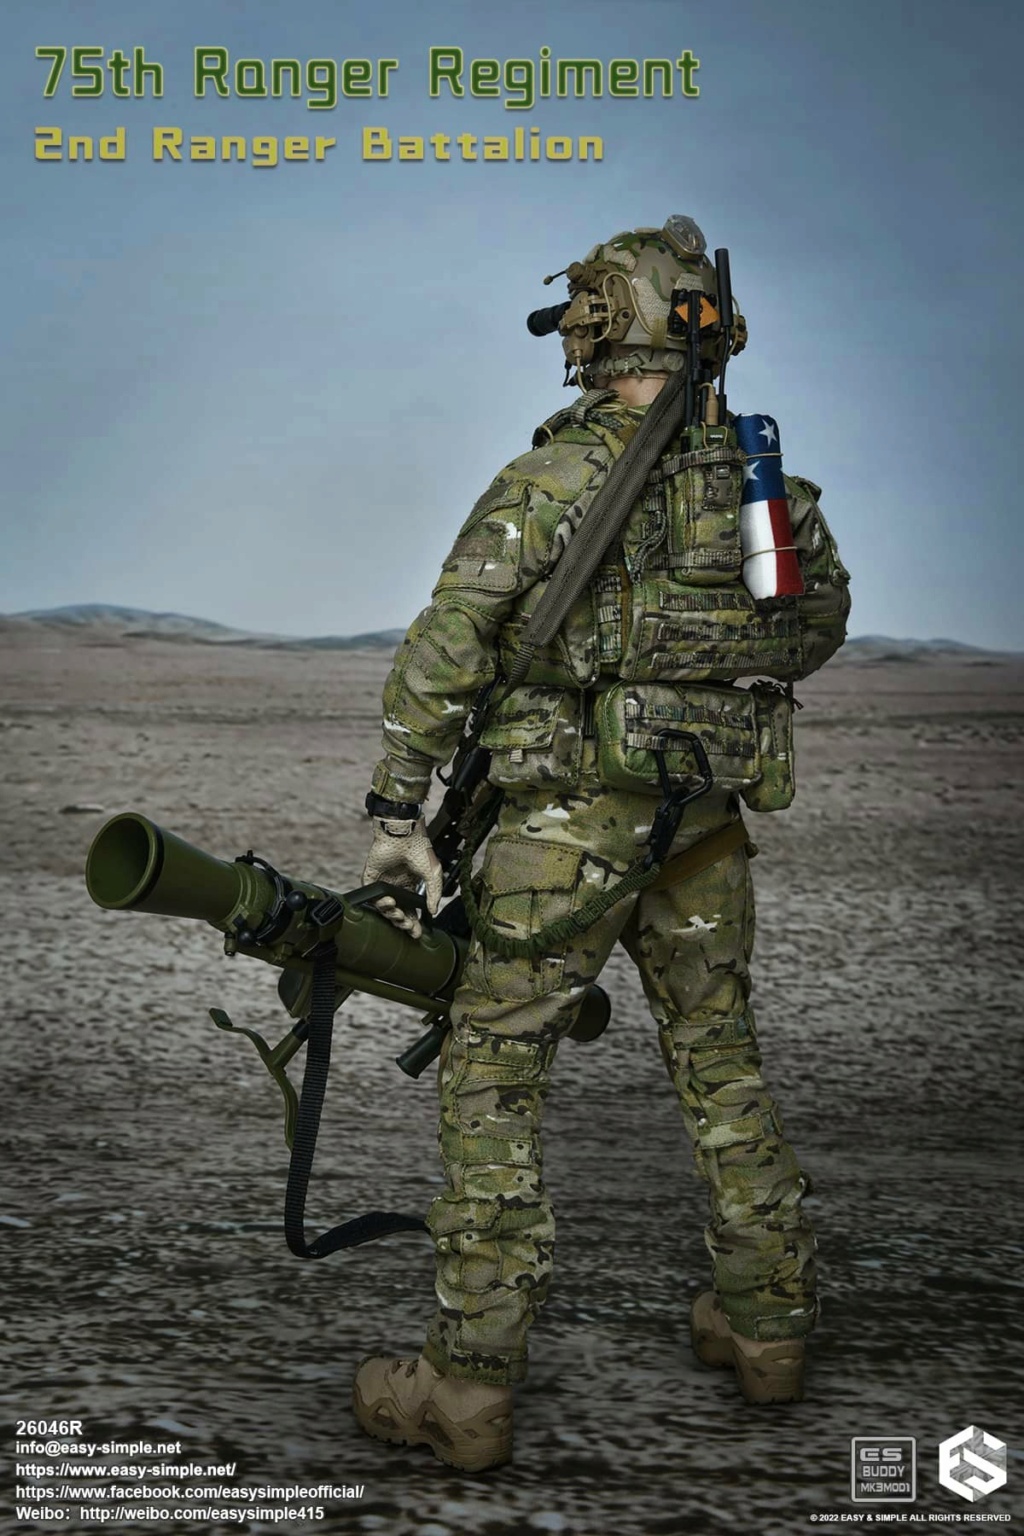 modernmilitary - NEW PRODUCT: Easy&Simple: 26046R 1/6 Scale 75th Ranger Regiment 2nd Ranger Battalion 27613711